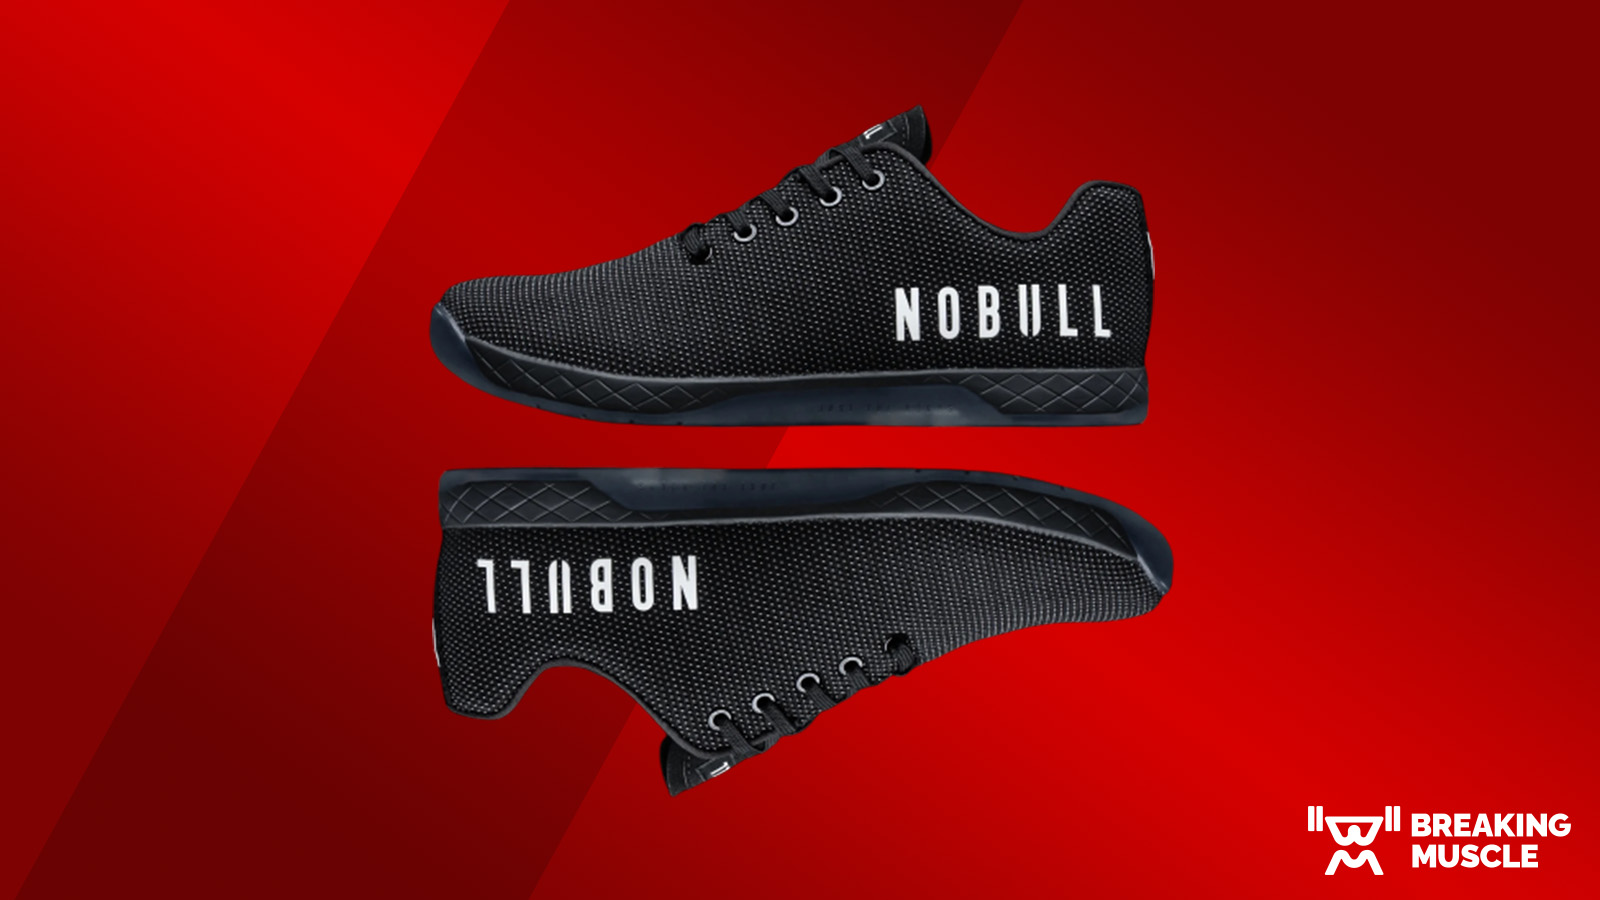 Are NoBull Shoes Good for Home Treadmill Use?